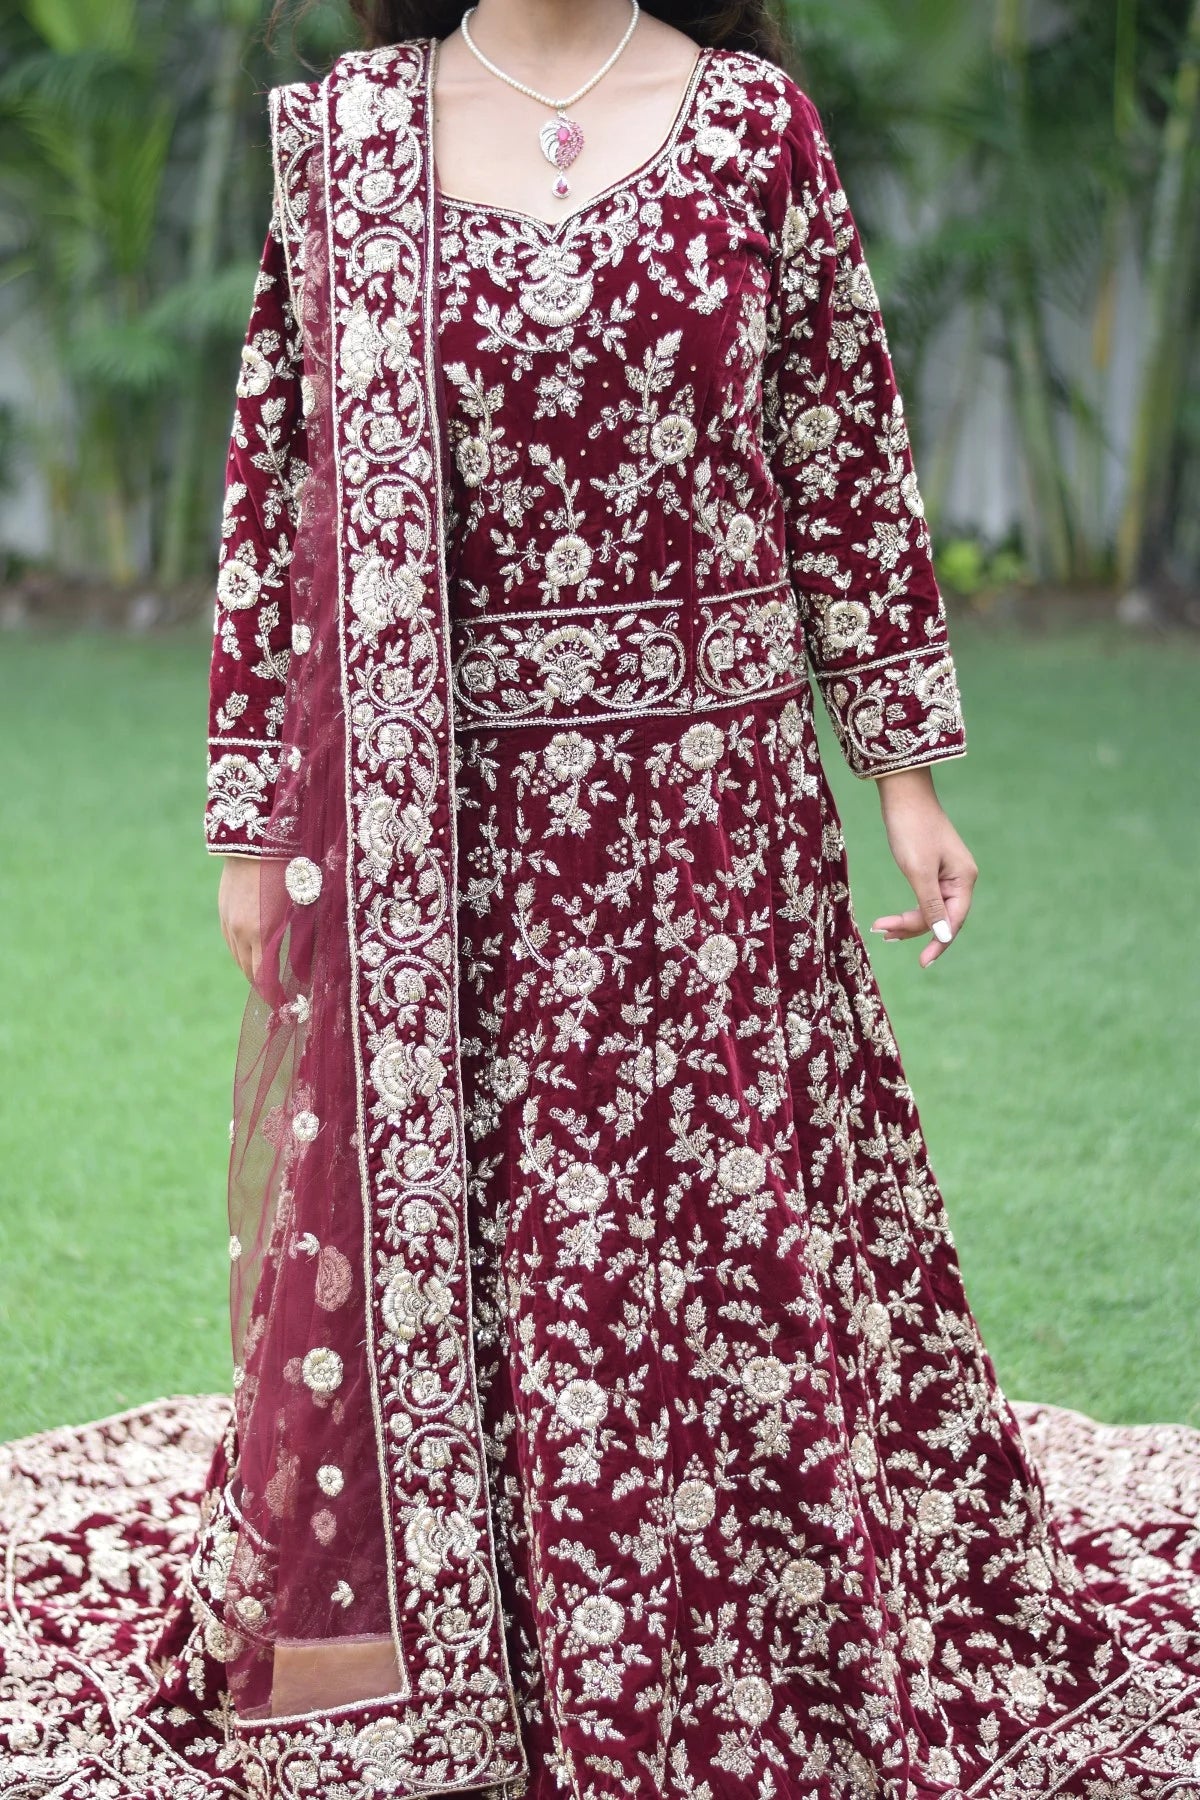 The Trail Gown in maroon is a versatile choice for Indian women, as demonstrated by how this woman pairs it with statement jewelry and bold makeup.